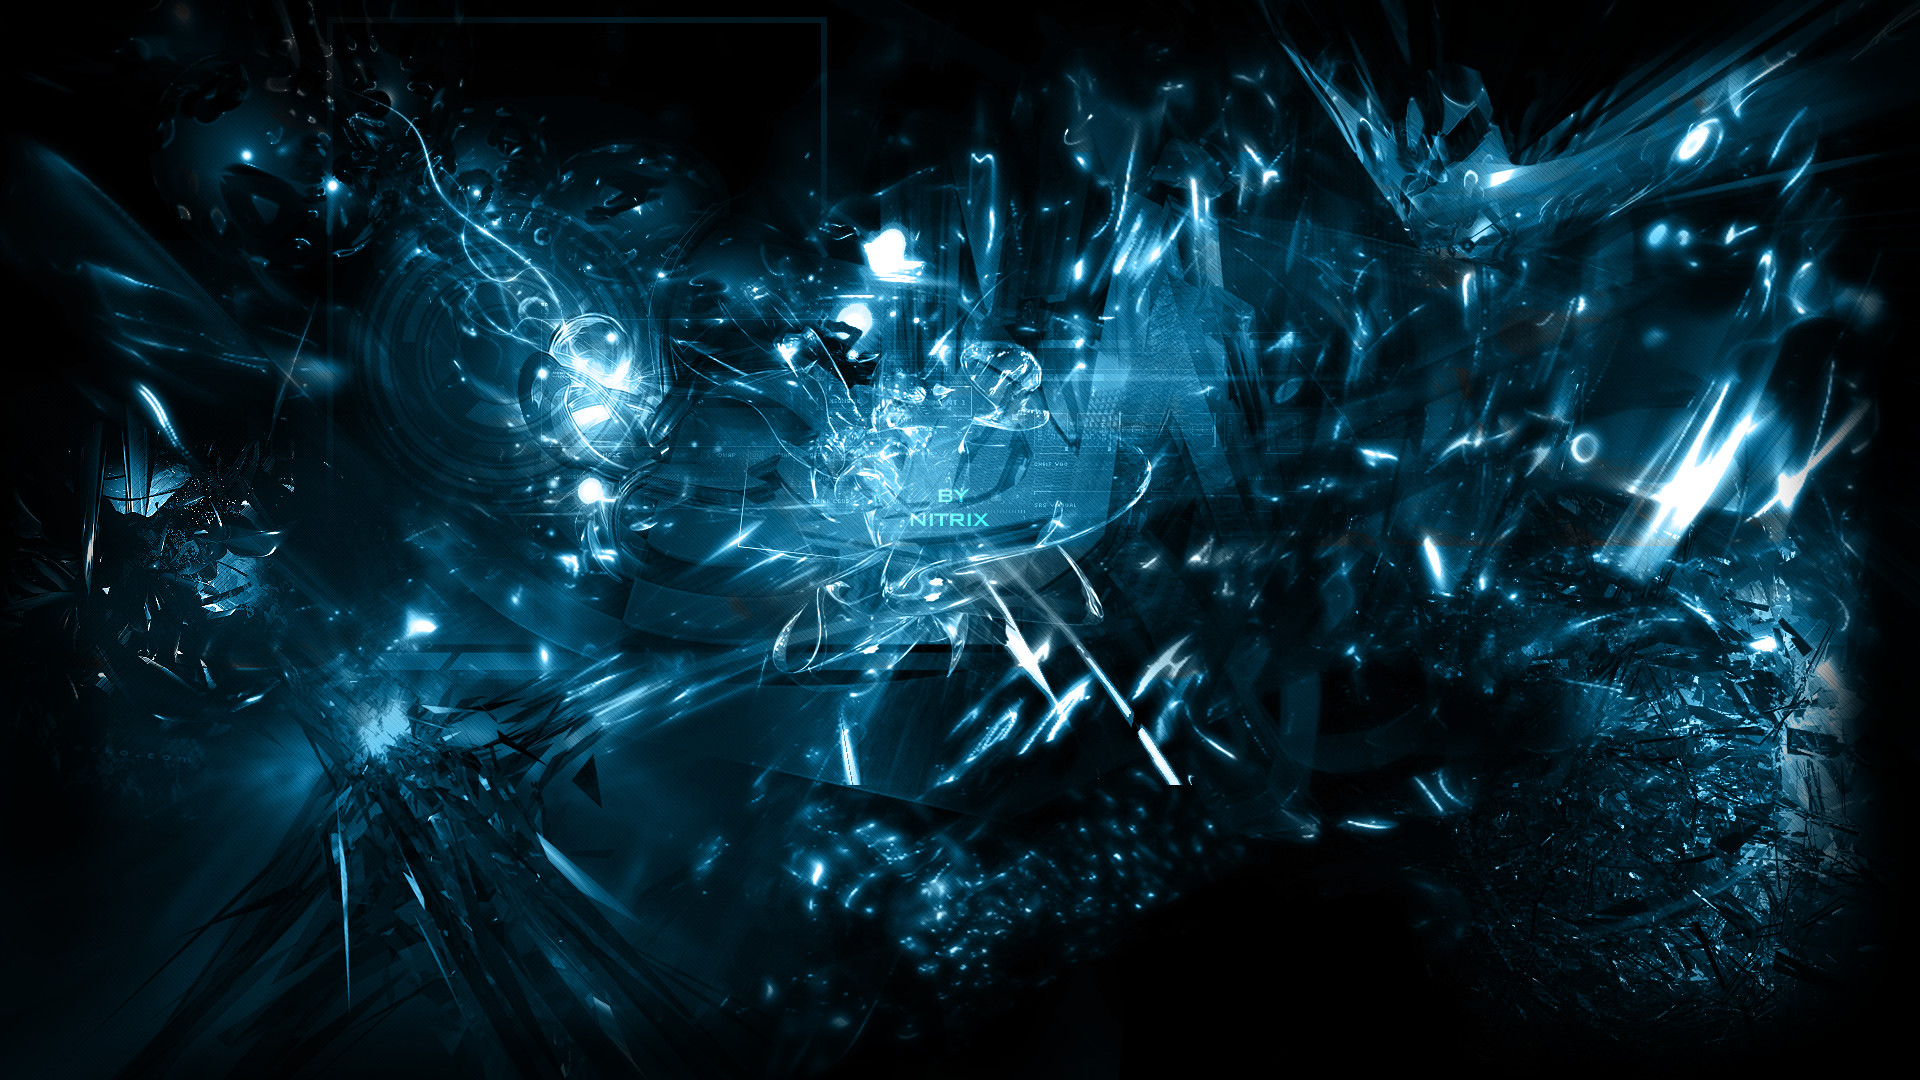 1920x1080 space abstract wallpaper by nitr1x digital art mixed media abstract .